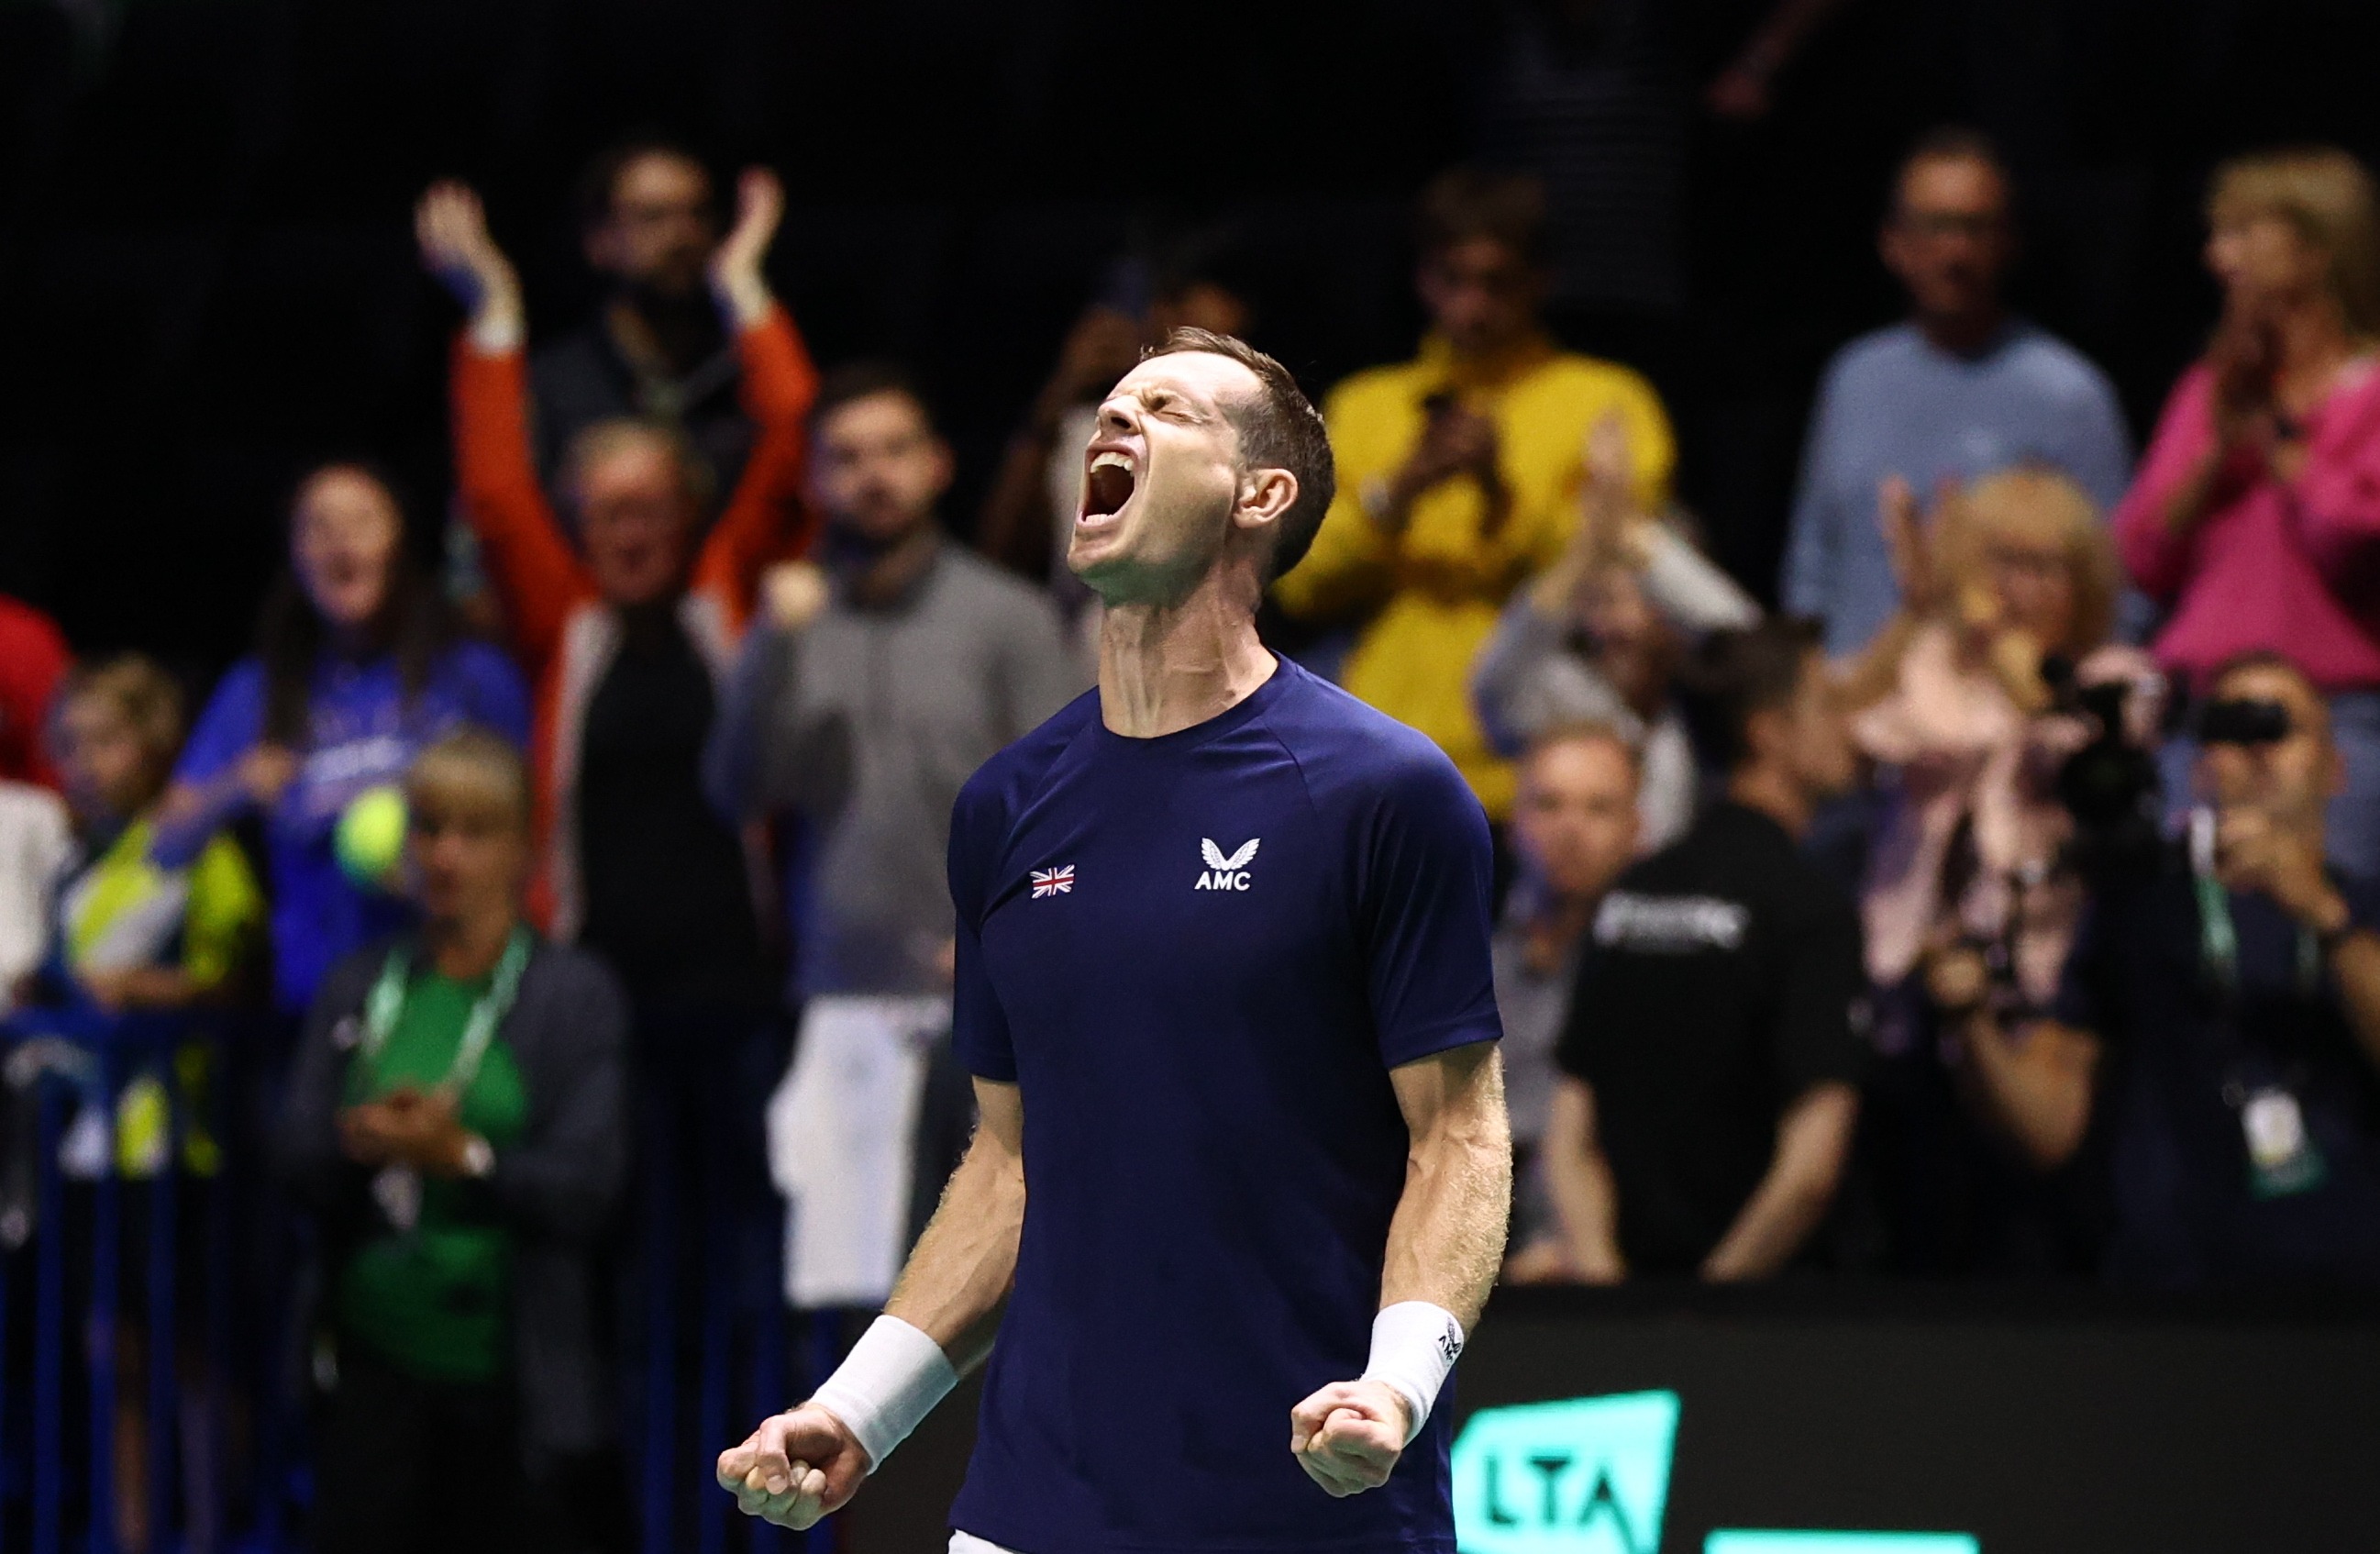 , Andy Murray pays tribute to grandma on day of funeral